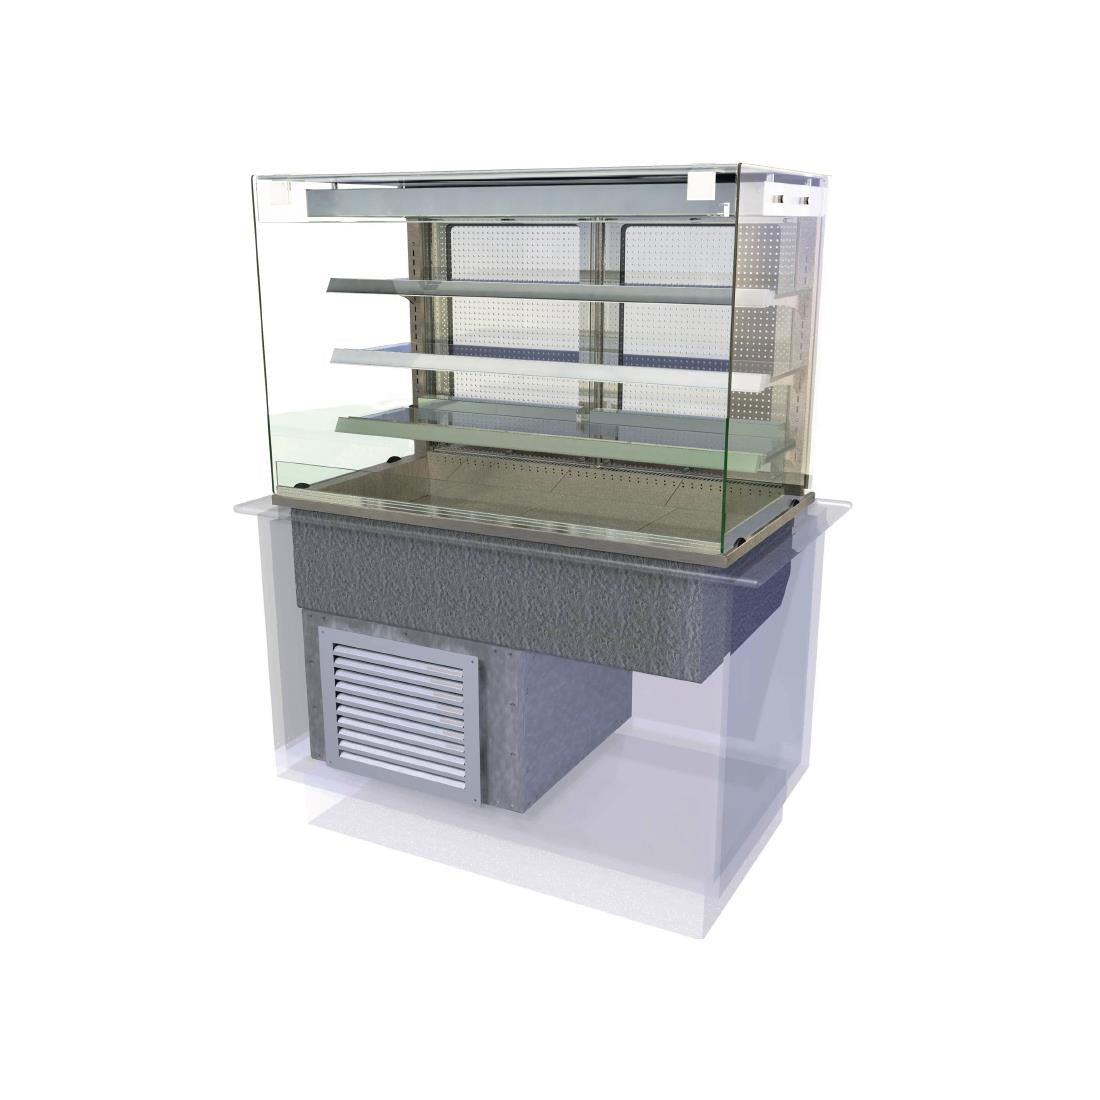 CW647 Kubus Drop In Multideck Self Service 1525mm KMDR4HT JD Catering Equipment Solutions Ltd